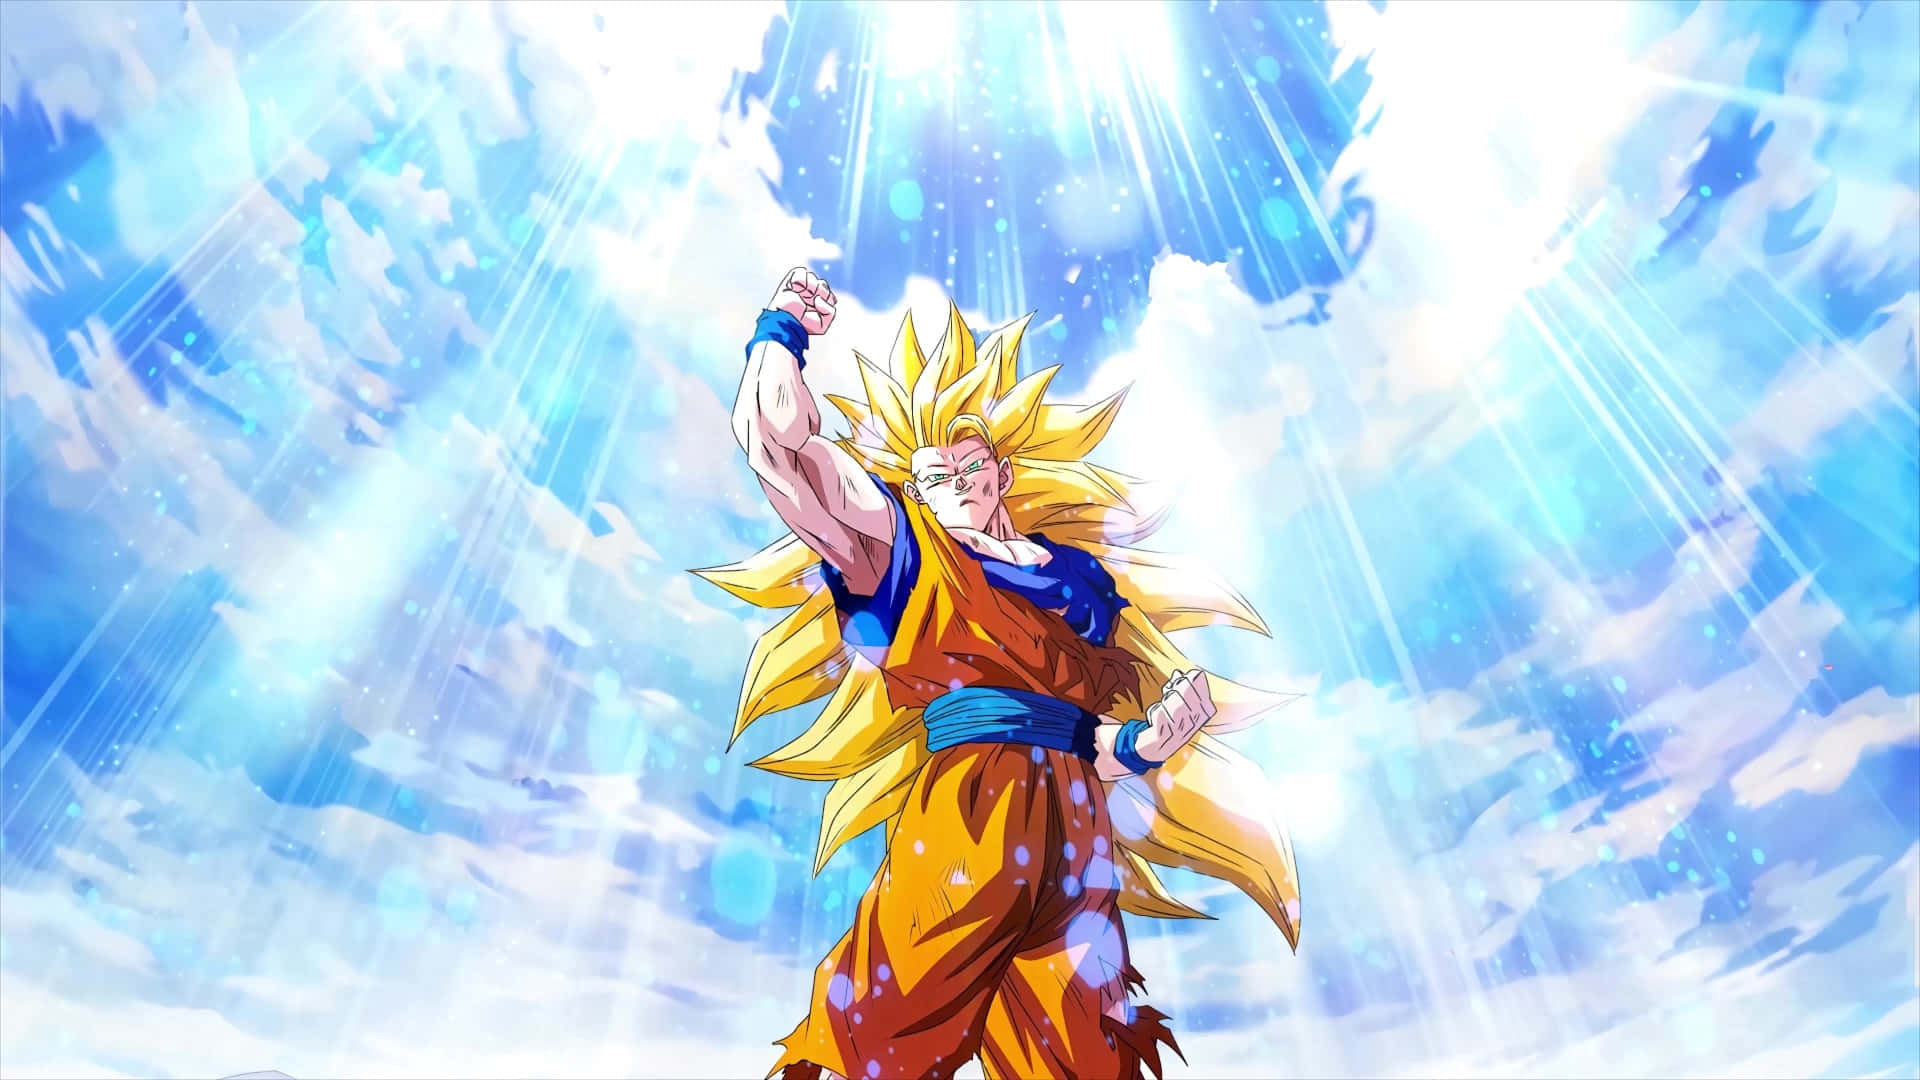 Download Goku powers up to Super Saiyan level in the amazing